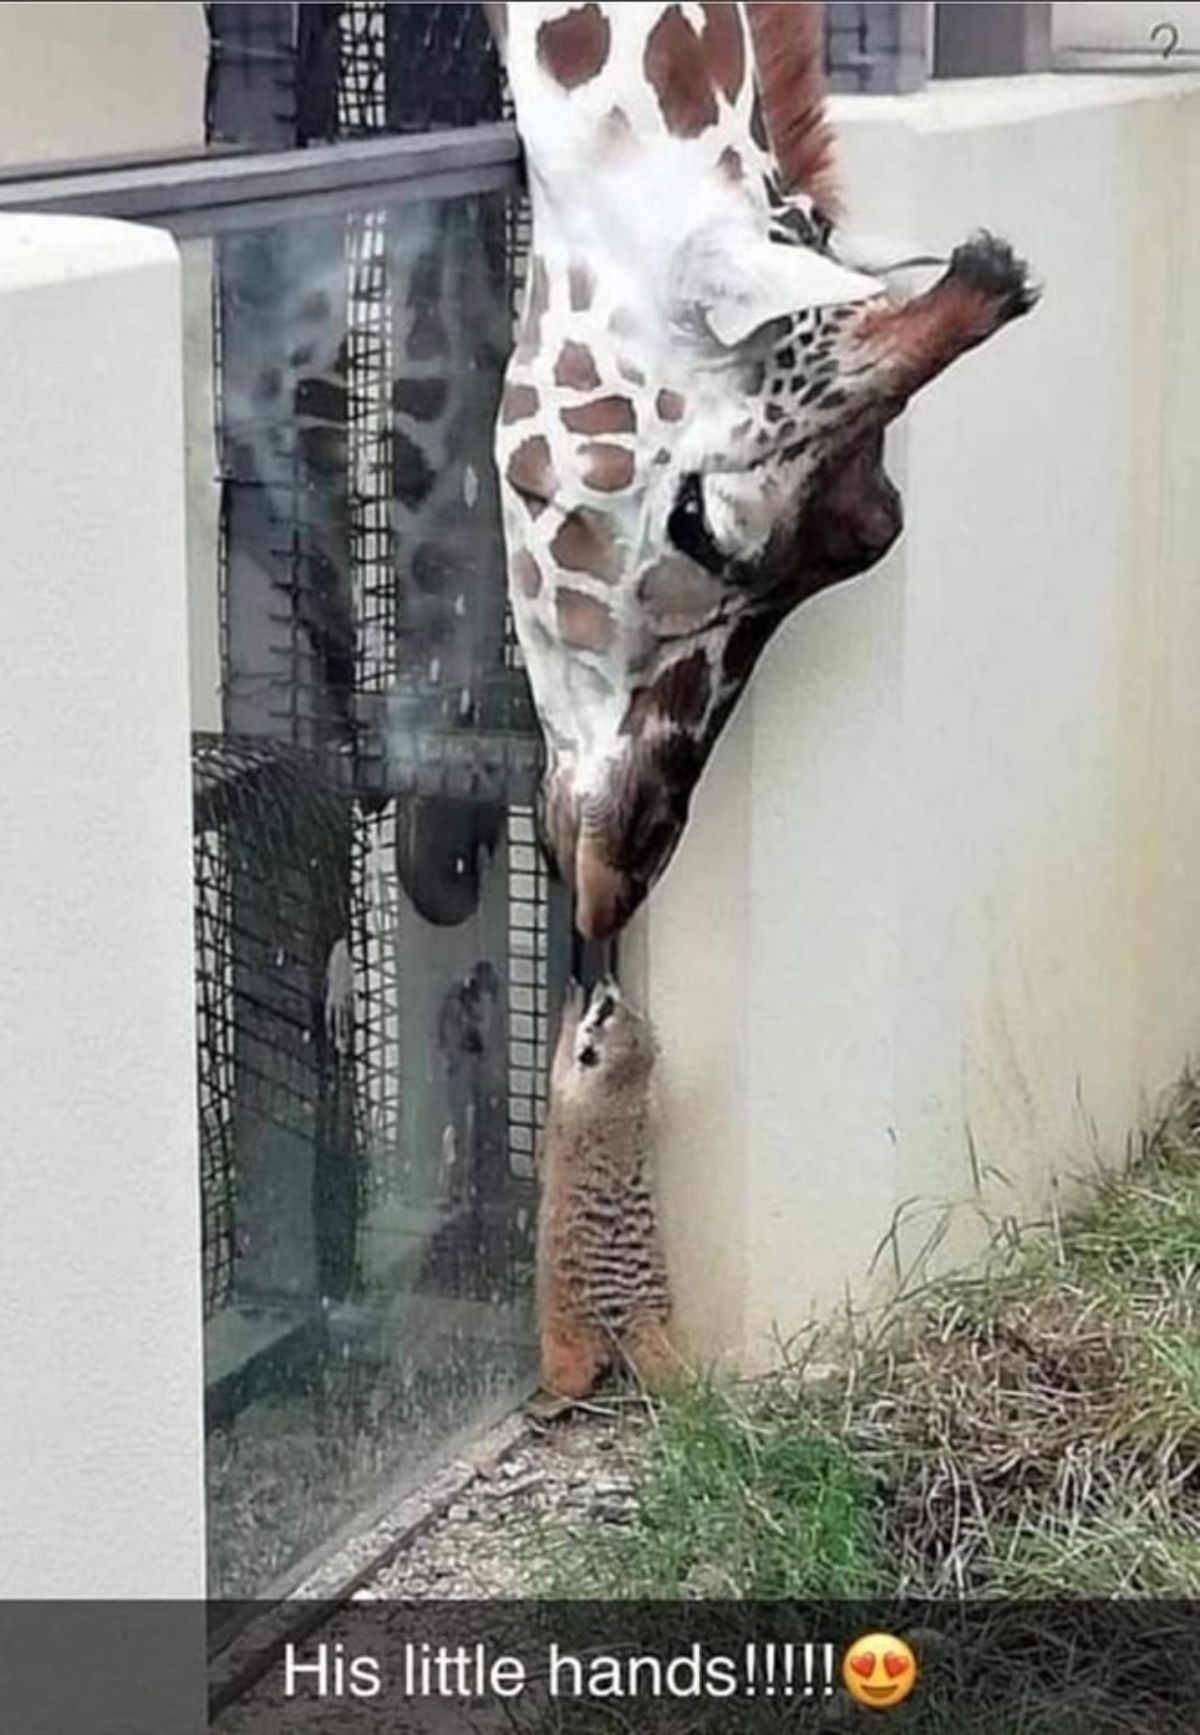 giraffe reaching over a glass door to sniff a baby meerkat with a caption saying his little hands!!!!! and a heart eyes emoji